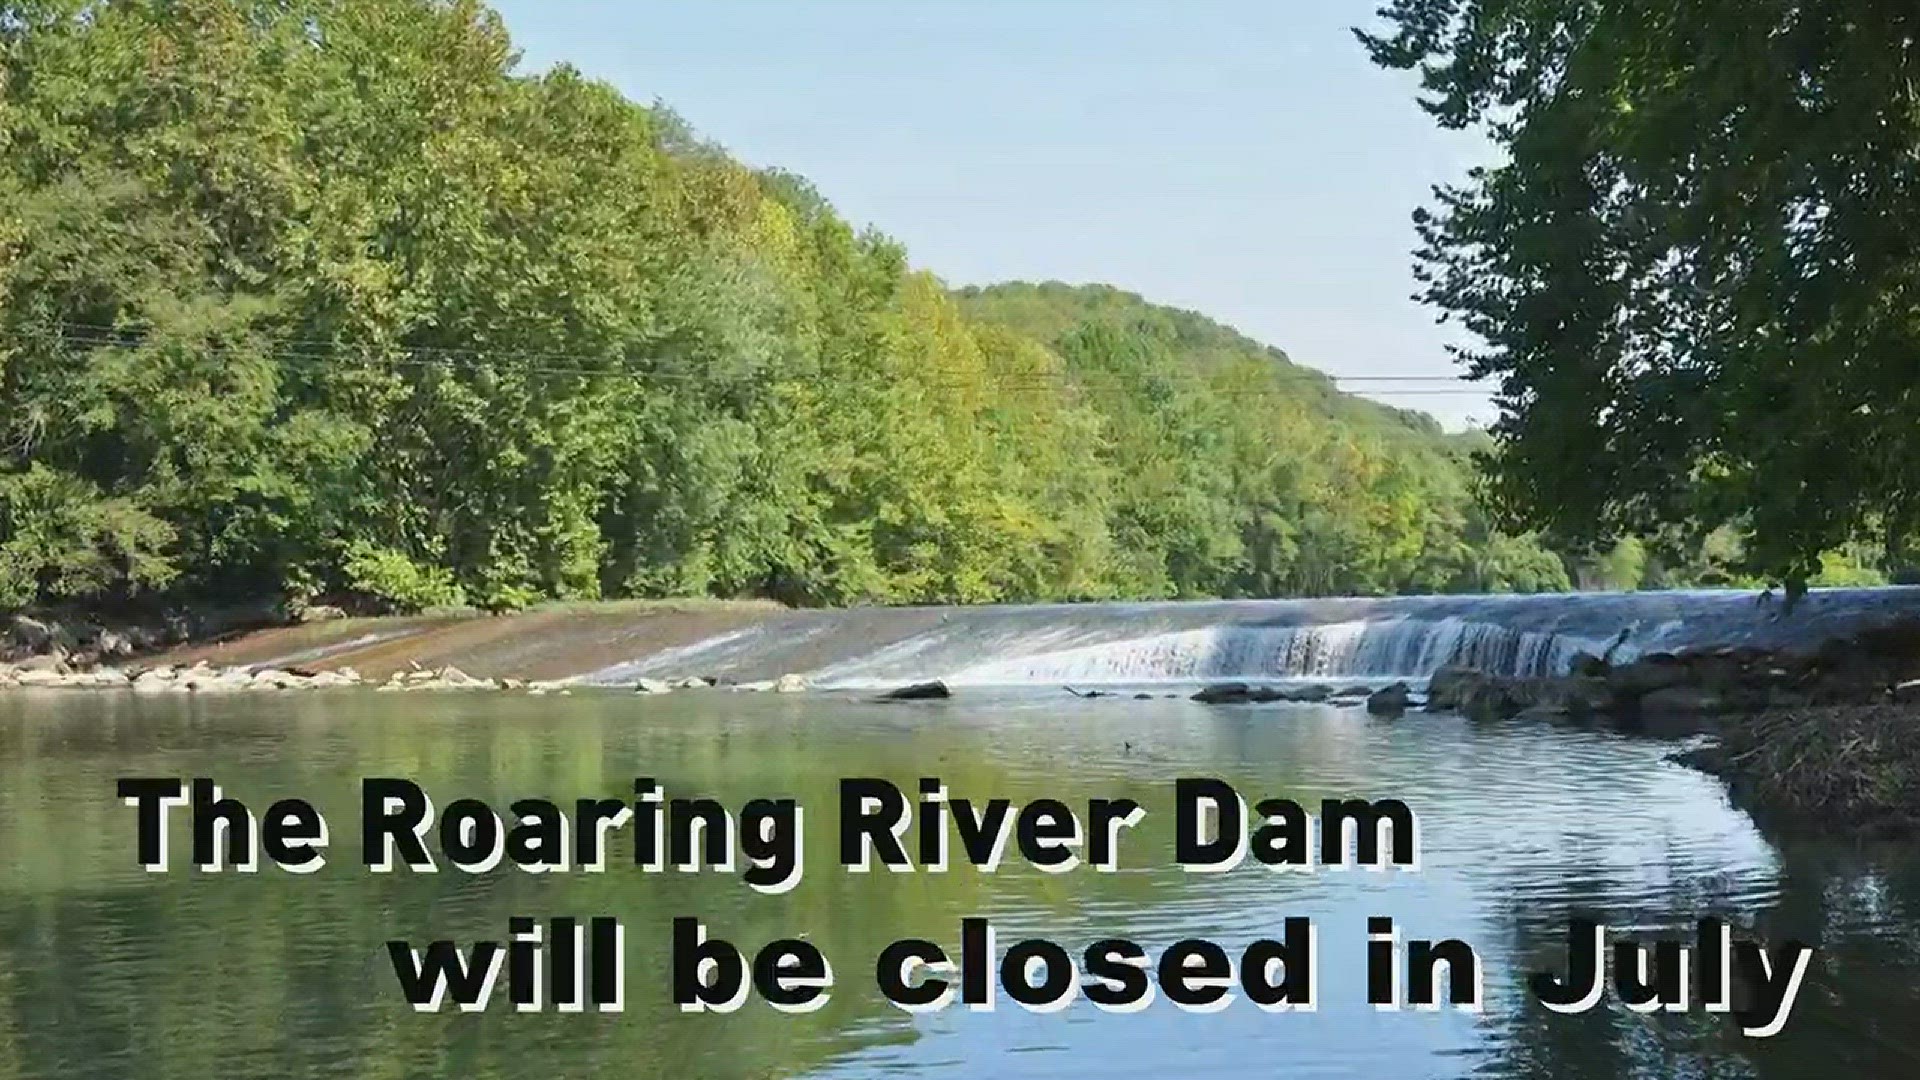 A dam in the Roaring River is set to be removed in late July making it the largest Tennessee dam to ever be removed for river and stream restoration purposes.